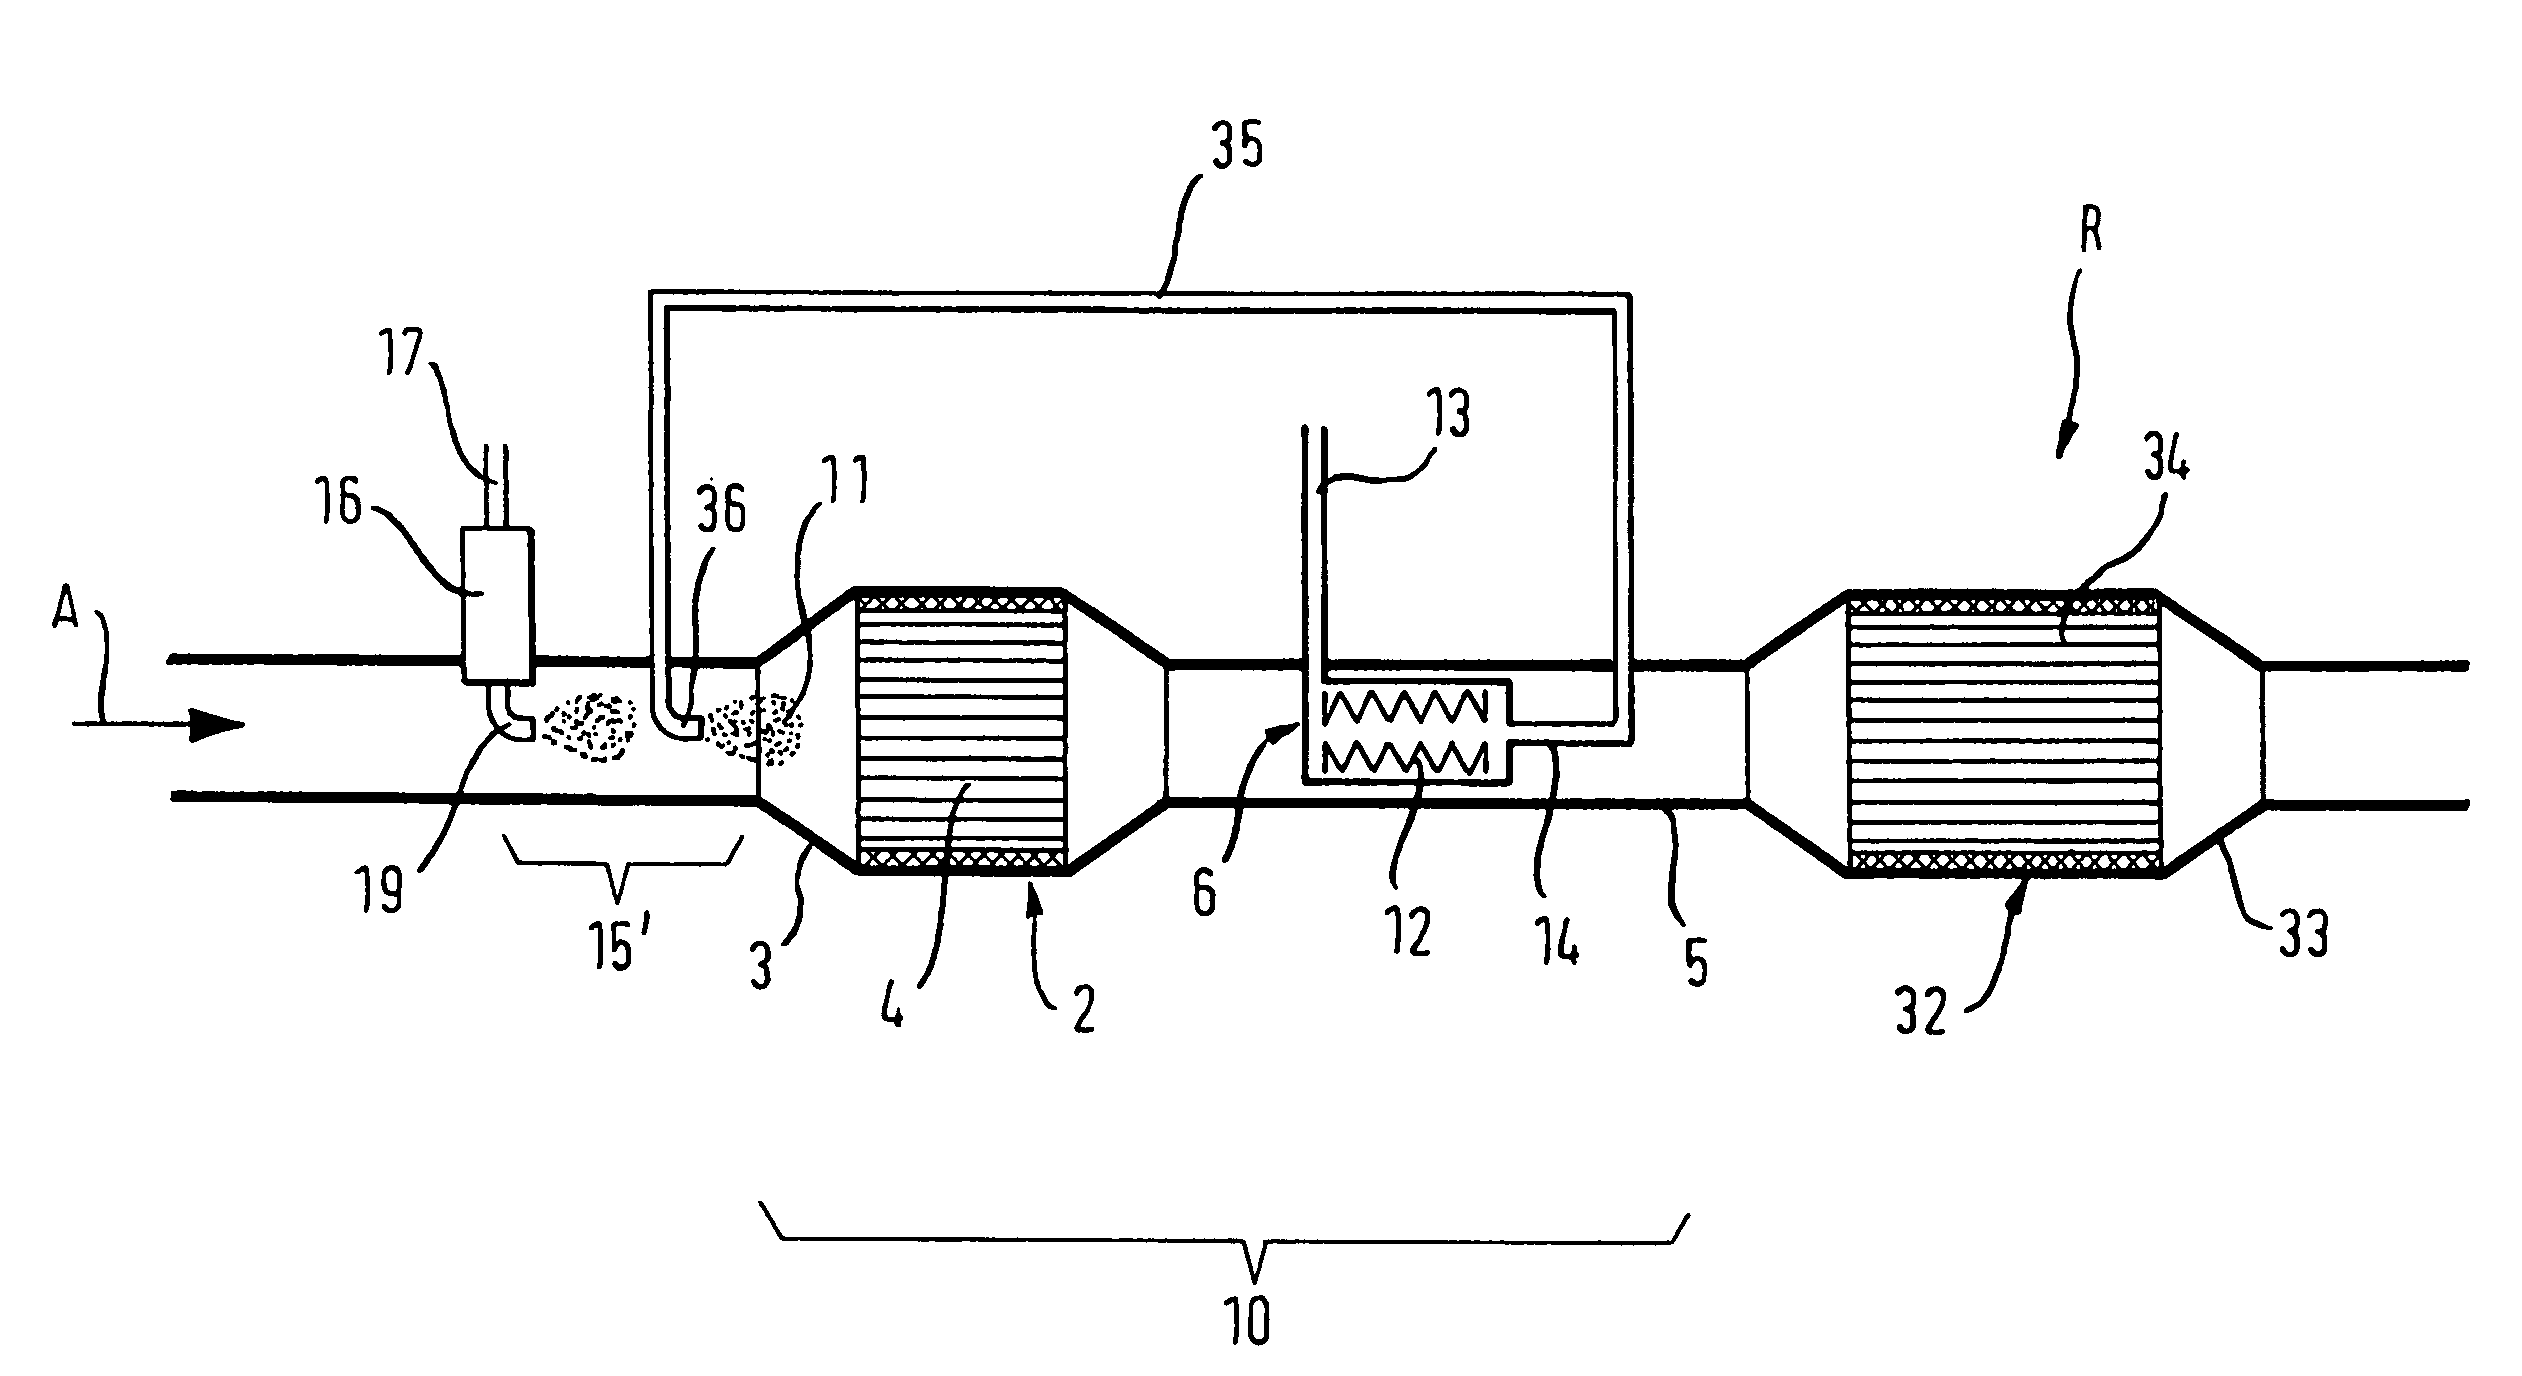 Motor vehicle provided with a diesel propulsion engine